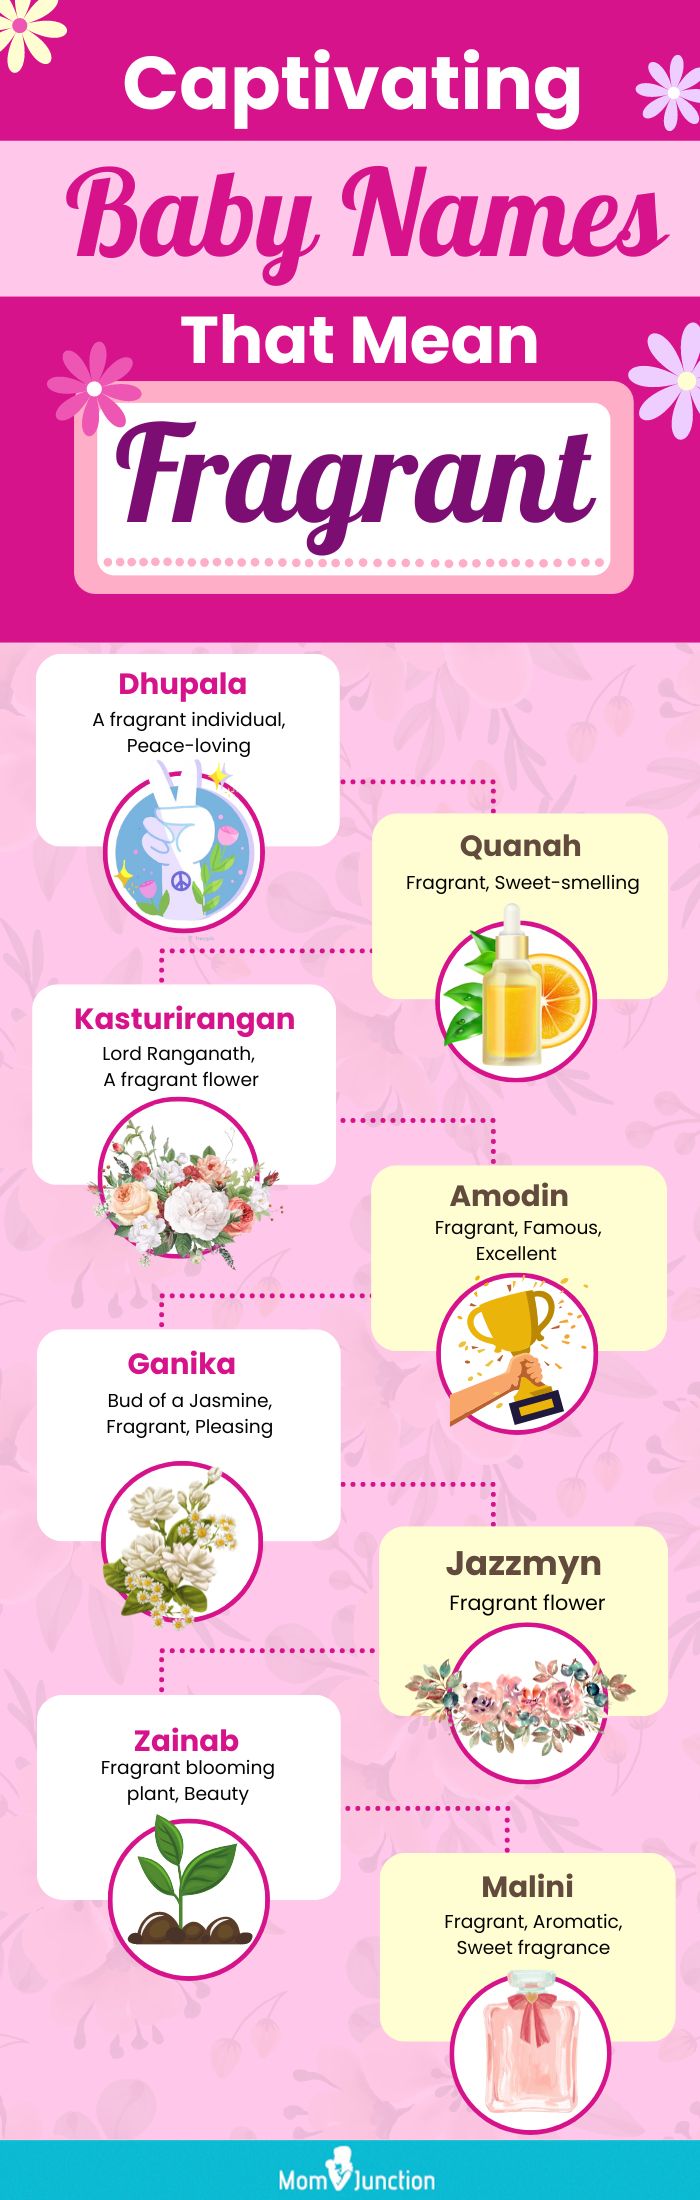 captivating baby names that mean fragrant (infographic)